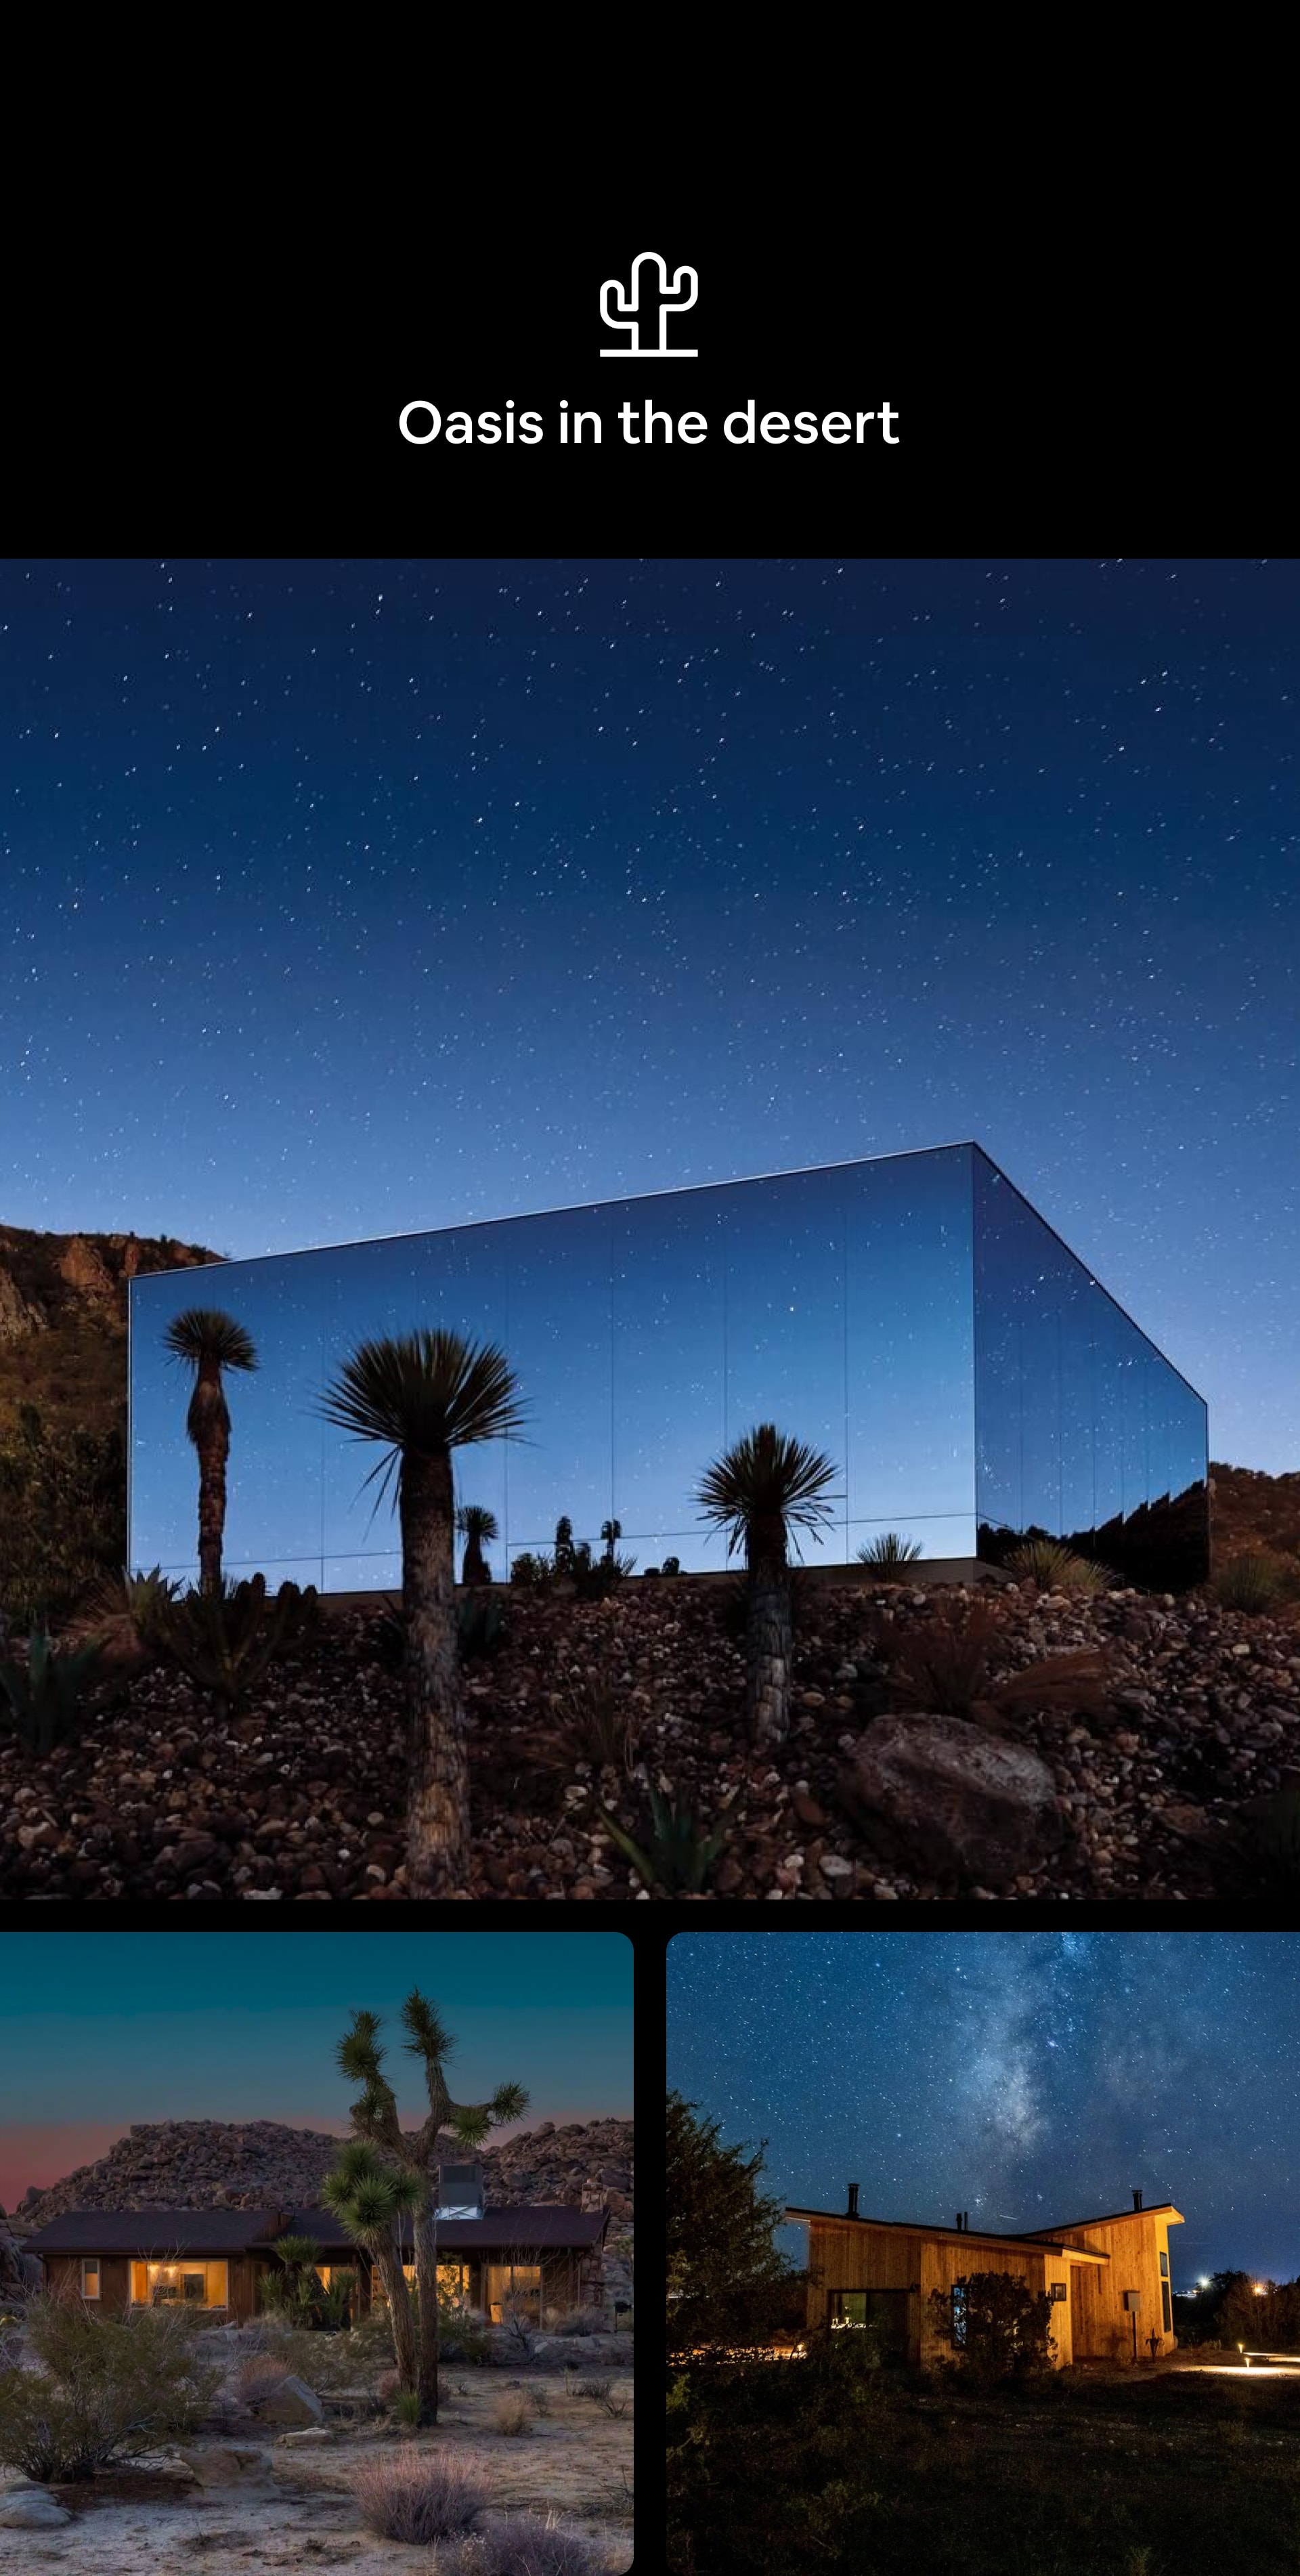 Desert Category icon Oasis in the desert A tryptic of nighttime, outdoor images. First image features a modern, glass home made entirely of windows that reflect a moody, star-filled sky. Second image shows a dimly-lit one-story cabin beneath a golden, full-moon sky. Third image depicts a modern cube-shaped cabin with large glass windows against a dark blue, moonlit sky.